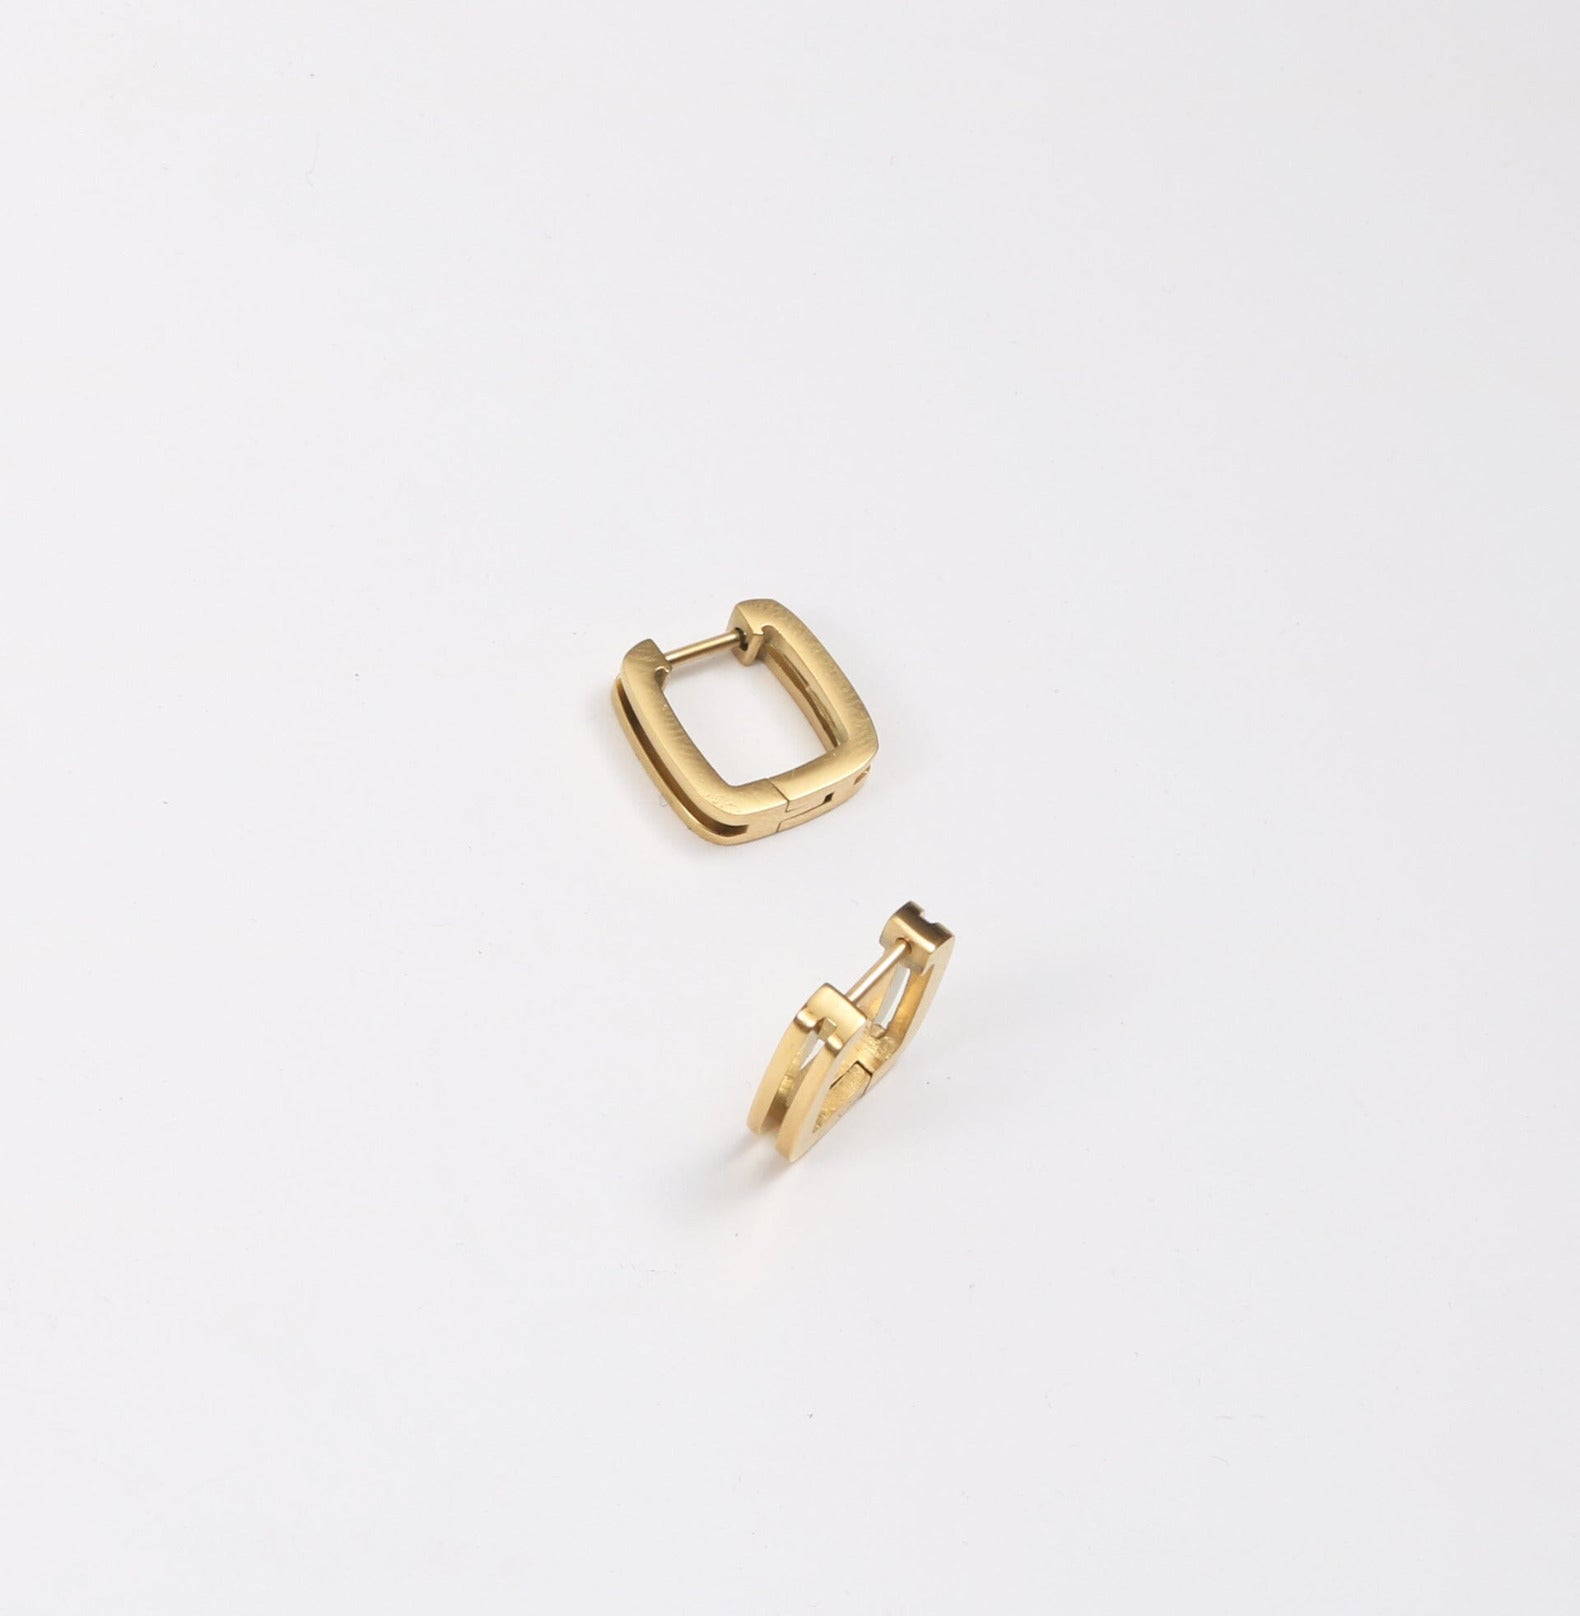 SQUARE HOLLOW HOOP EARRING - GOLD earing Yubama Jewelry Online Store - The Elegant Designs of Gold and Silver ! 